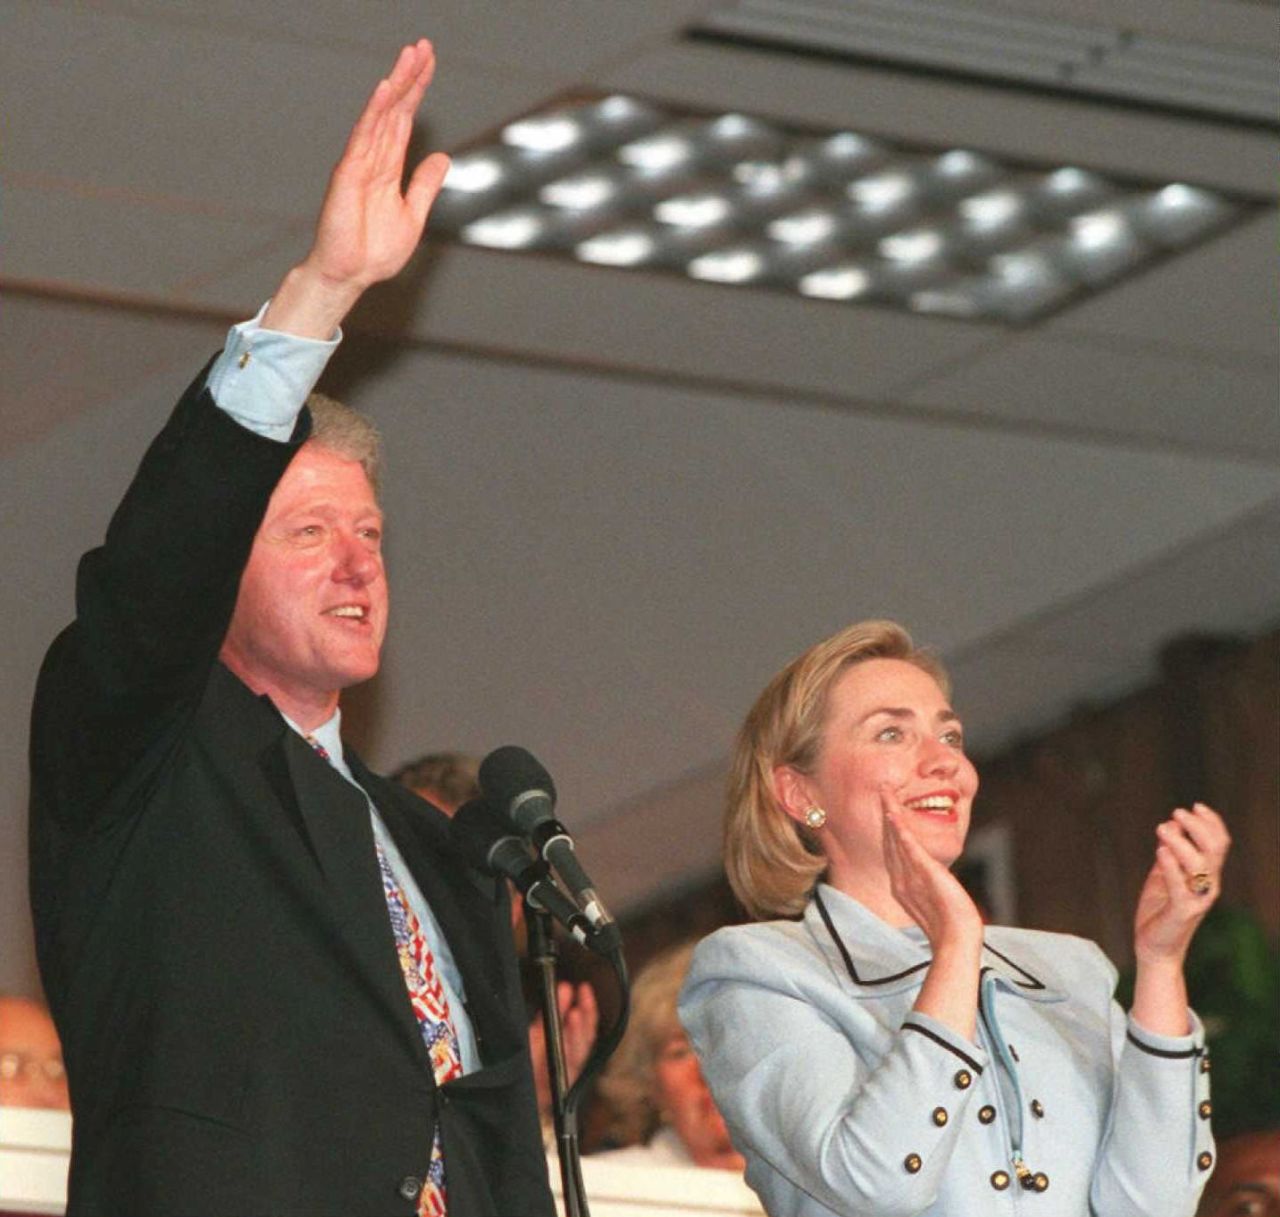 The Clintons opened the Centennial Olympic Games in Atlanta on July 20, 1996. A few months earlier, Hillary Clinton made a trip to Bosnia as first lady, and said she landed in the war-torn country under sniper fire. Years later, she was criticized by the Obama campaign for exaggerating her account of that trip. 